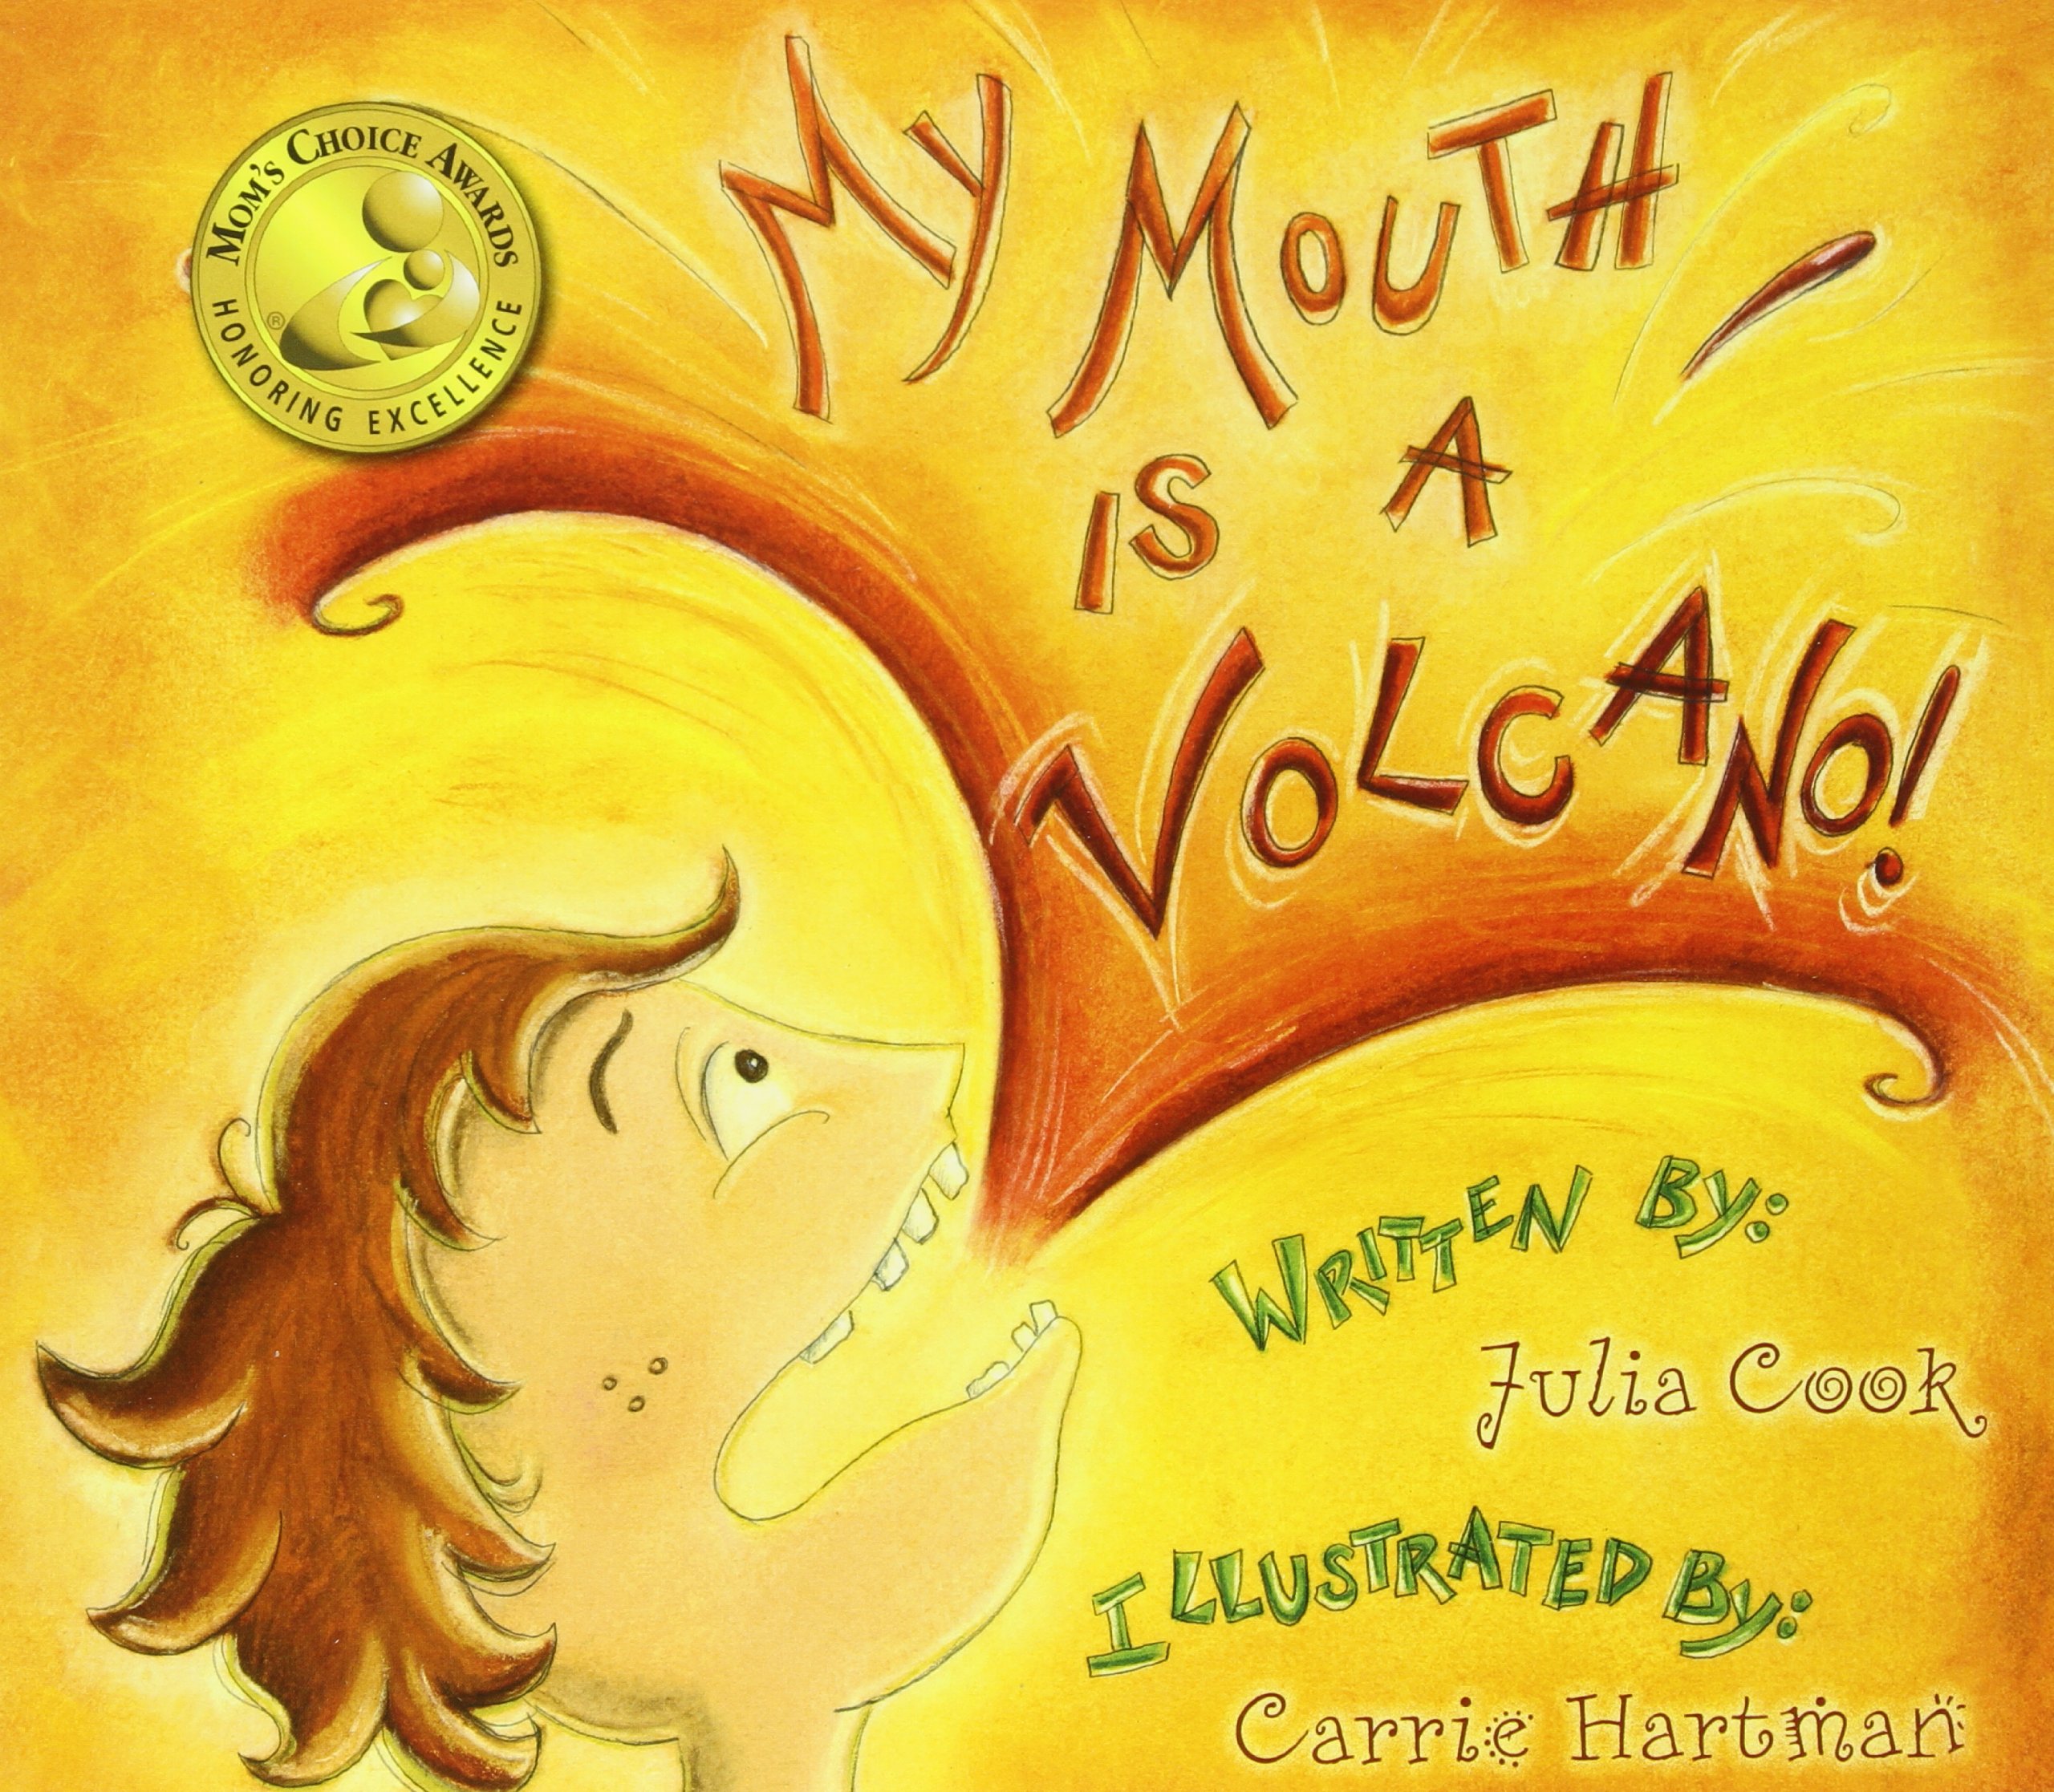 My Mouth Is a Volcano! teaches the value of respecting others.